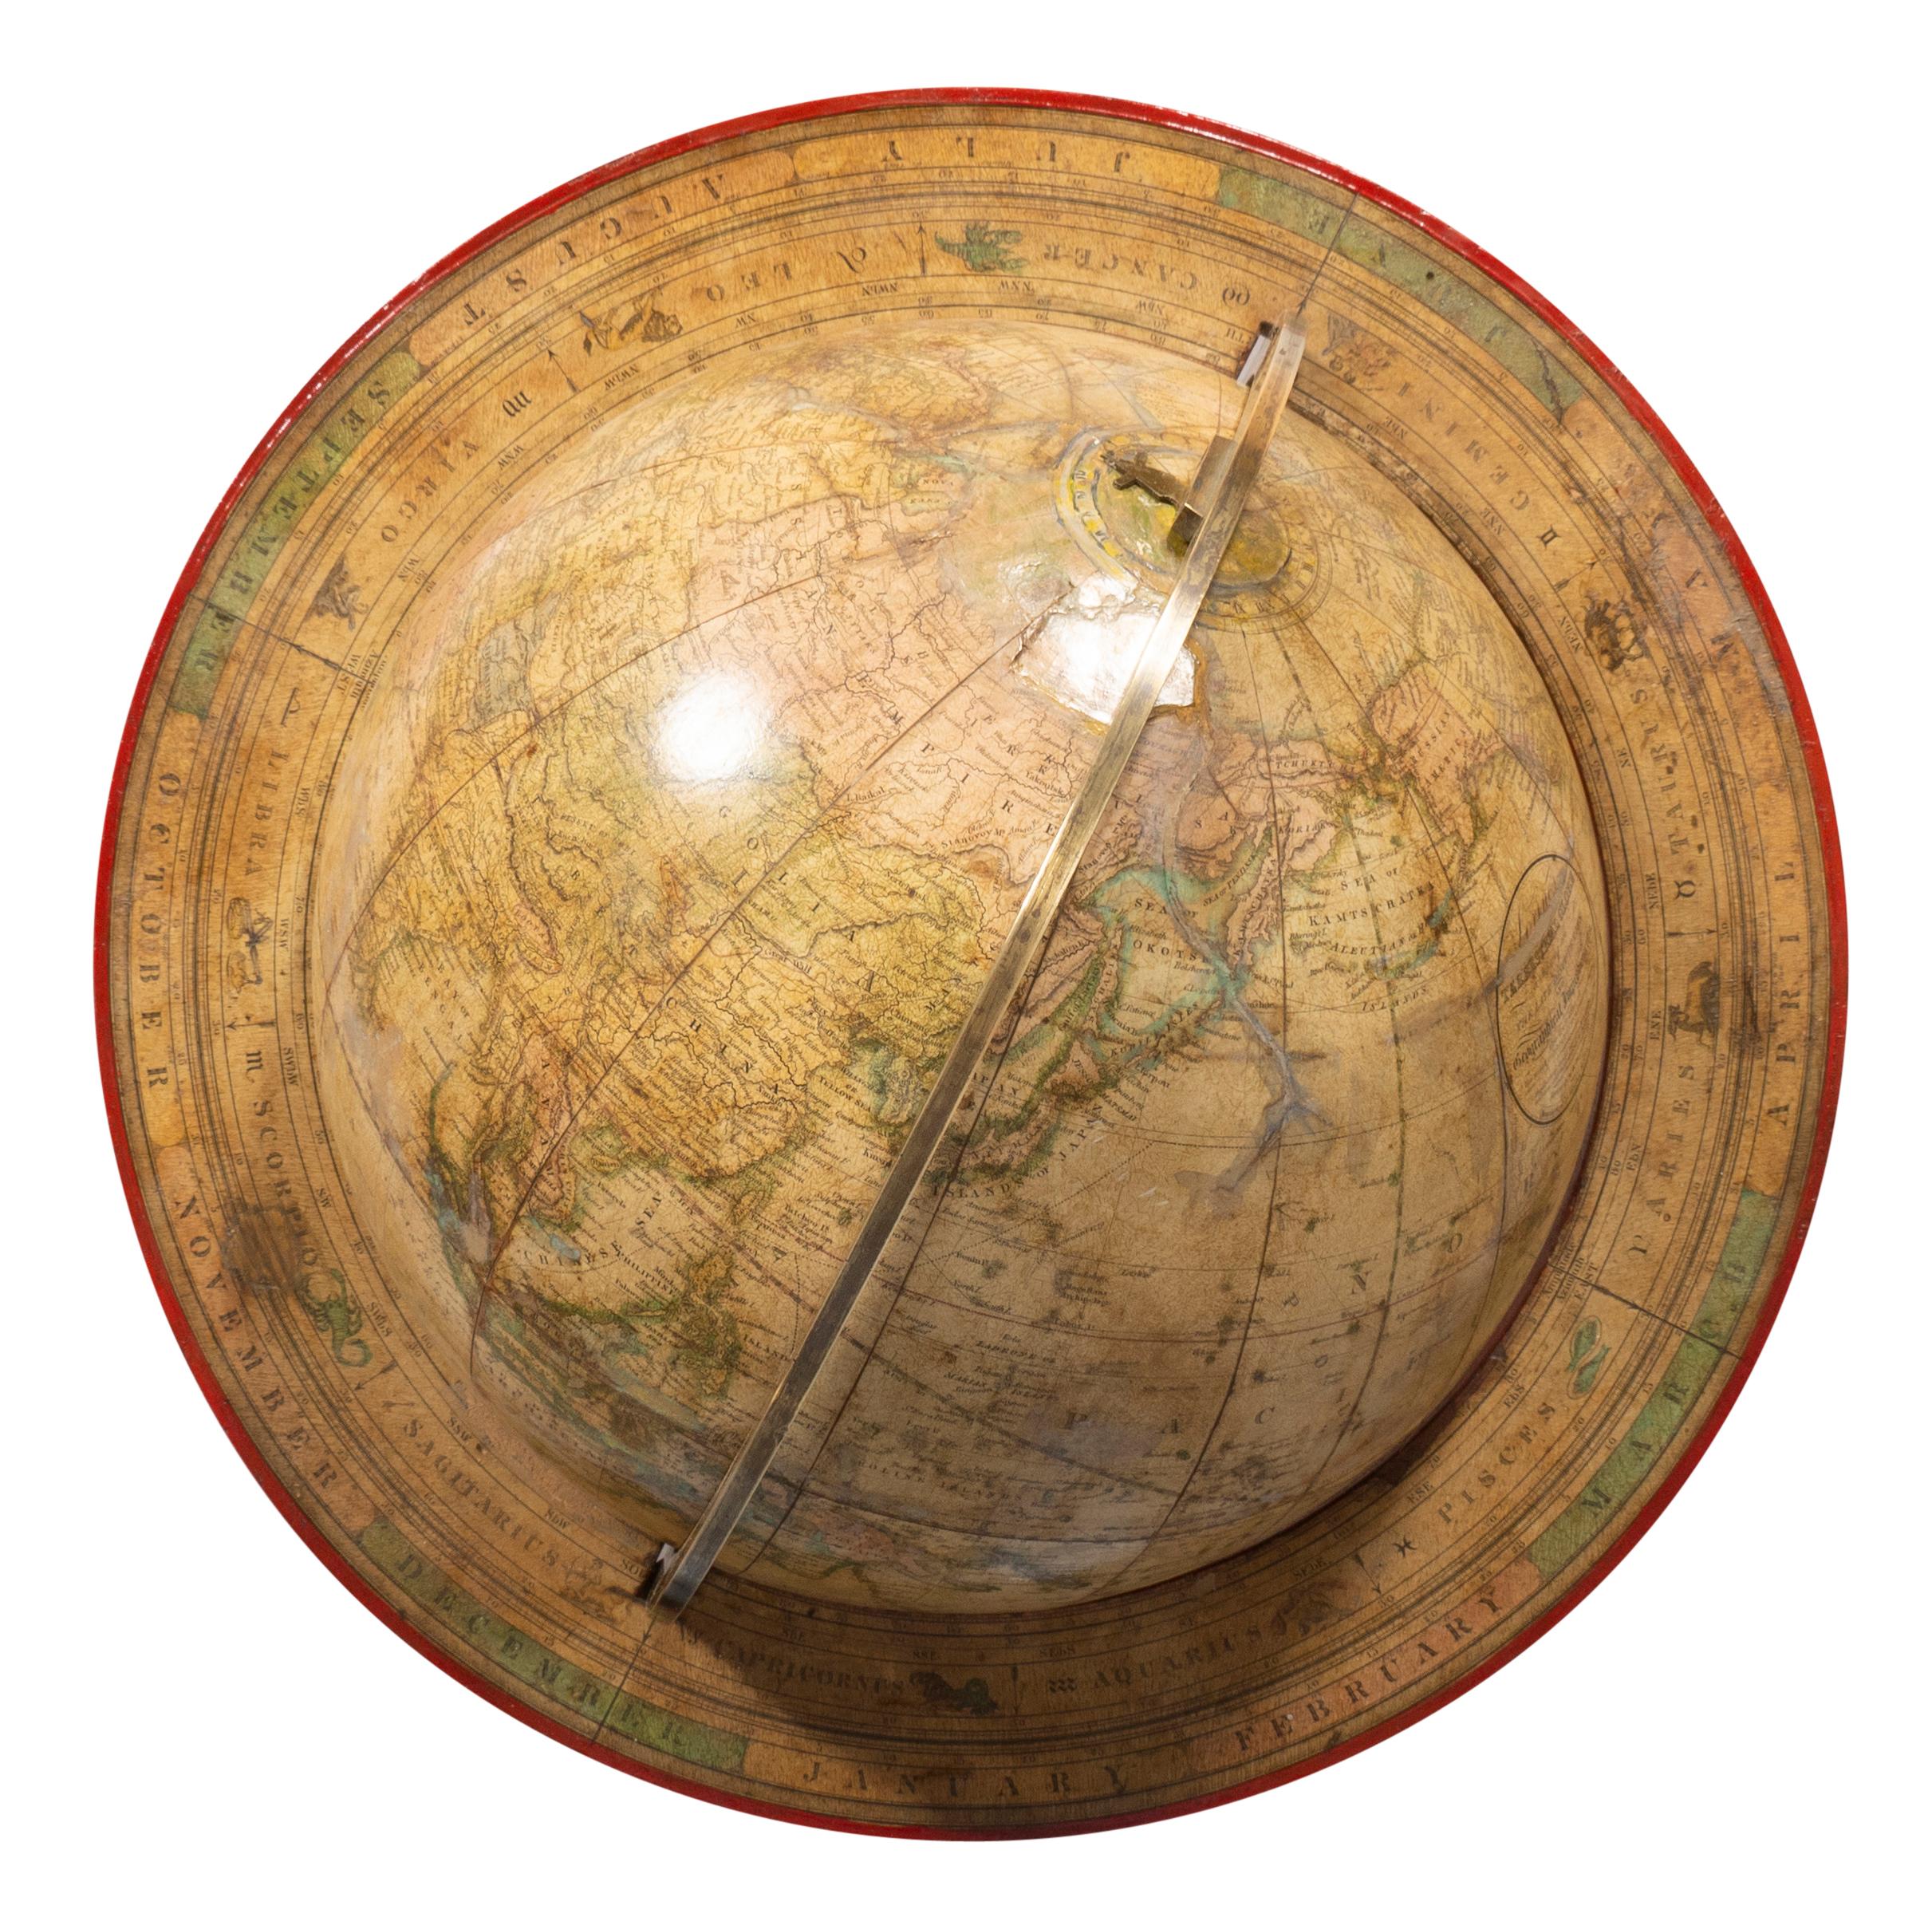 when was the globe created